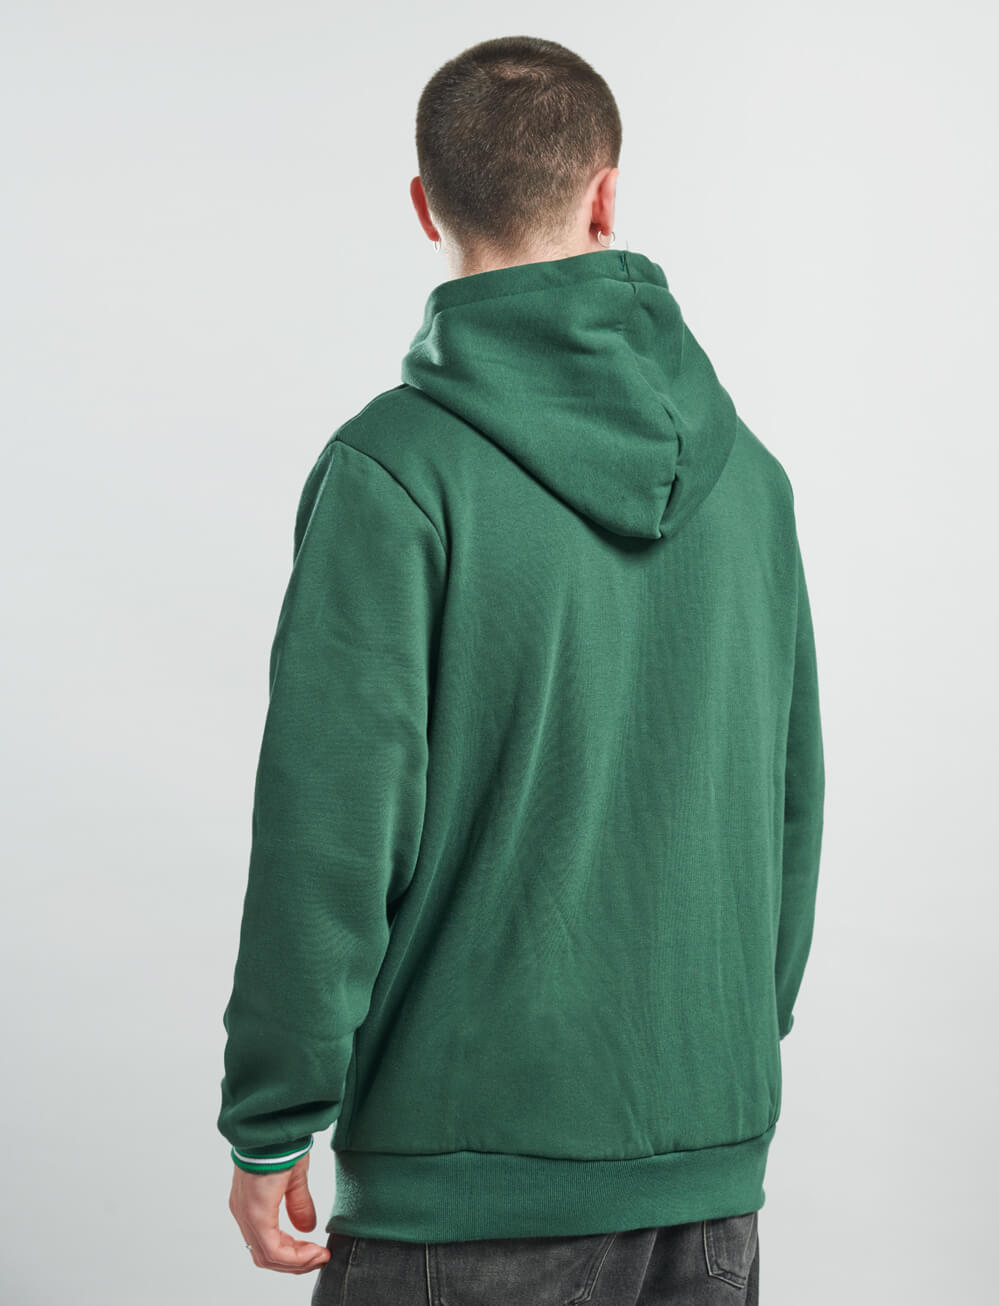 Official Celtic Full Zip Hoodie - Green - The World Football Store